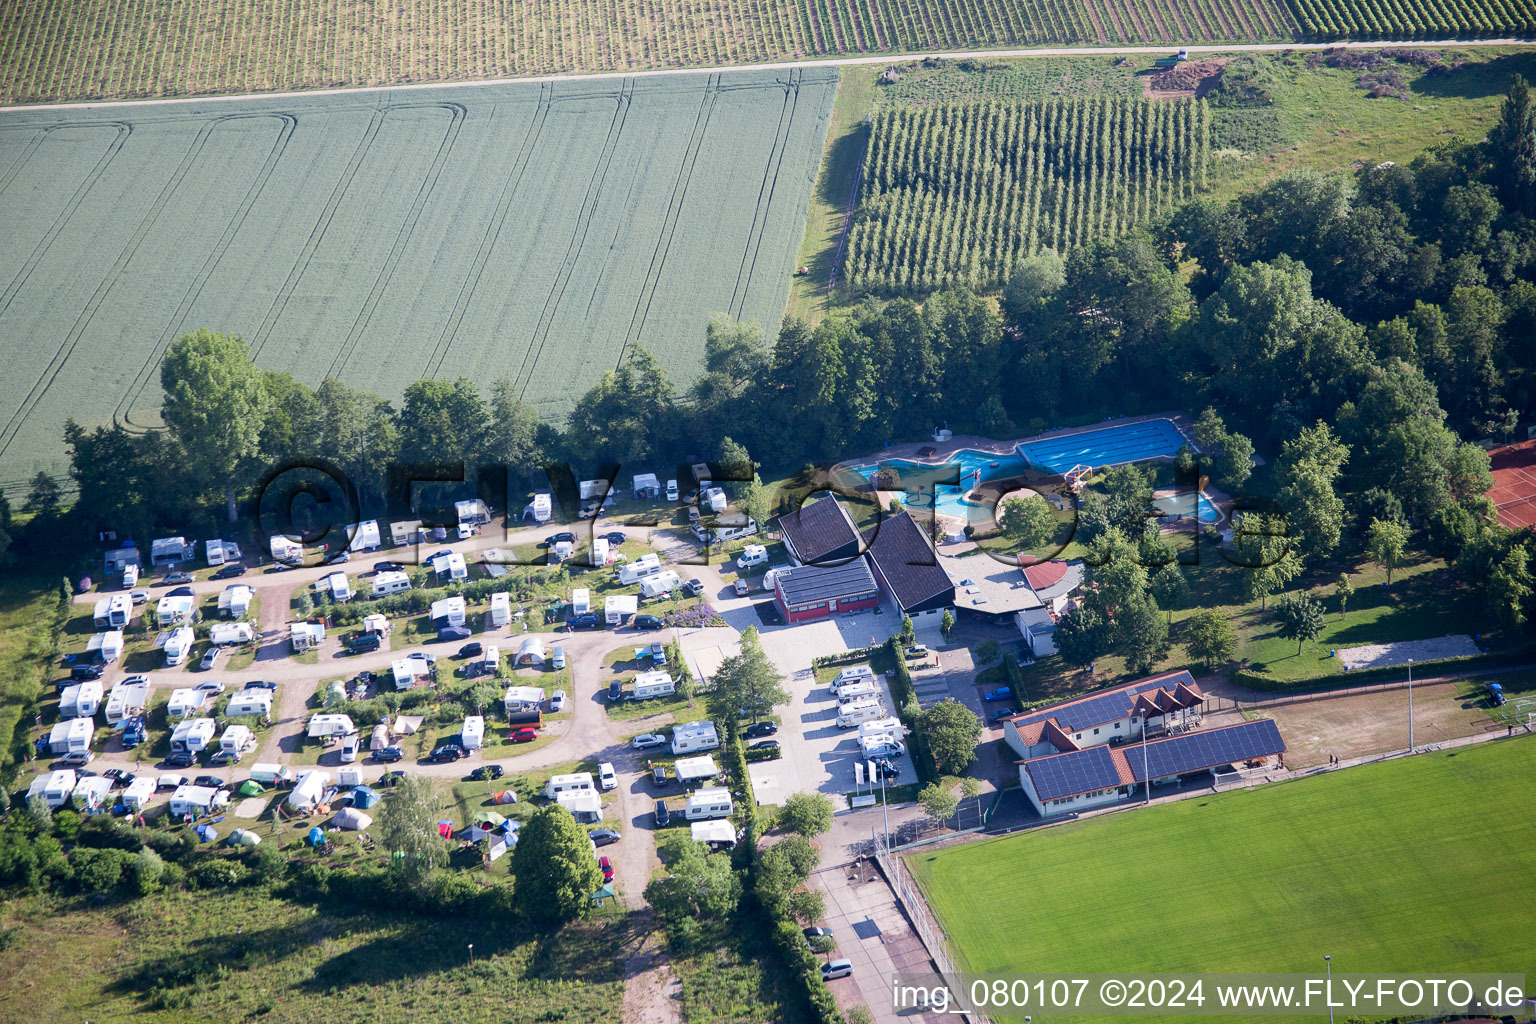 Aerial photograpy of Camping with caravans and tents in the district Ingenheim in Billigheim-Ingenheim in the state Rhineland-Palatinate